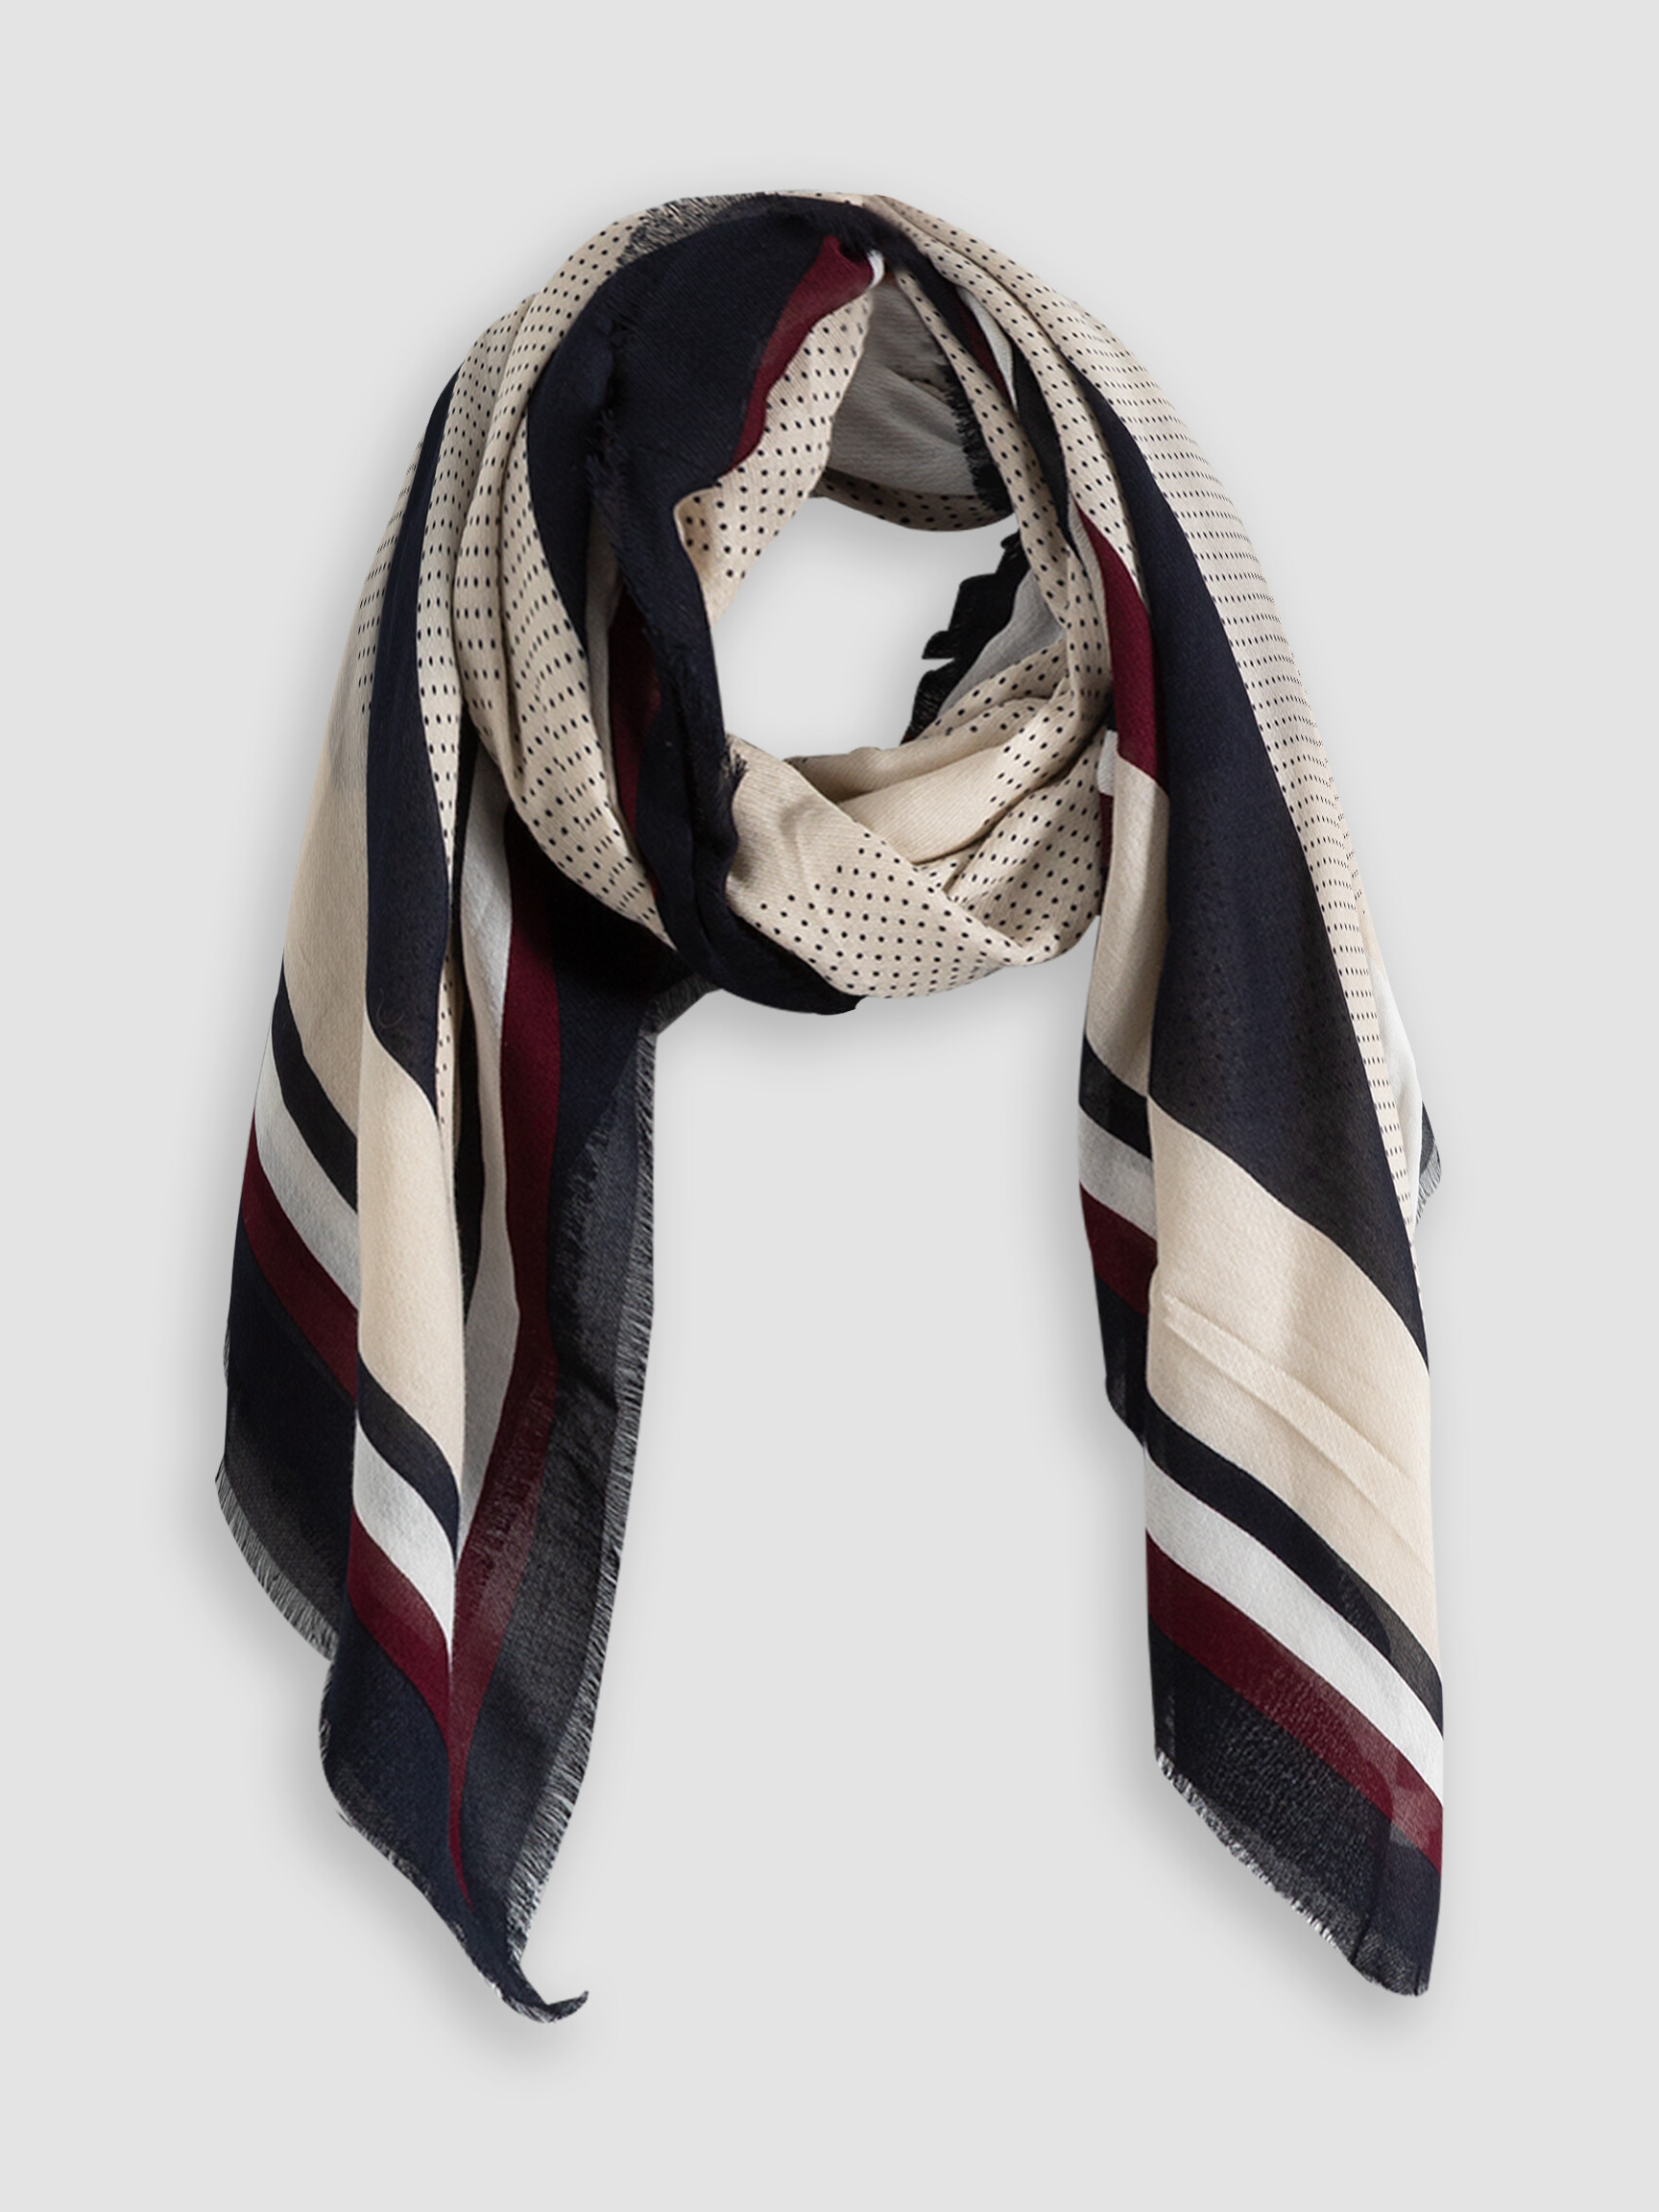 TOMMY HILFIGER | ACCESSORIES | SCARVES